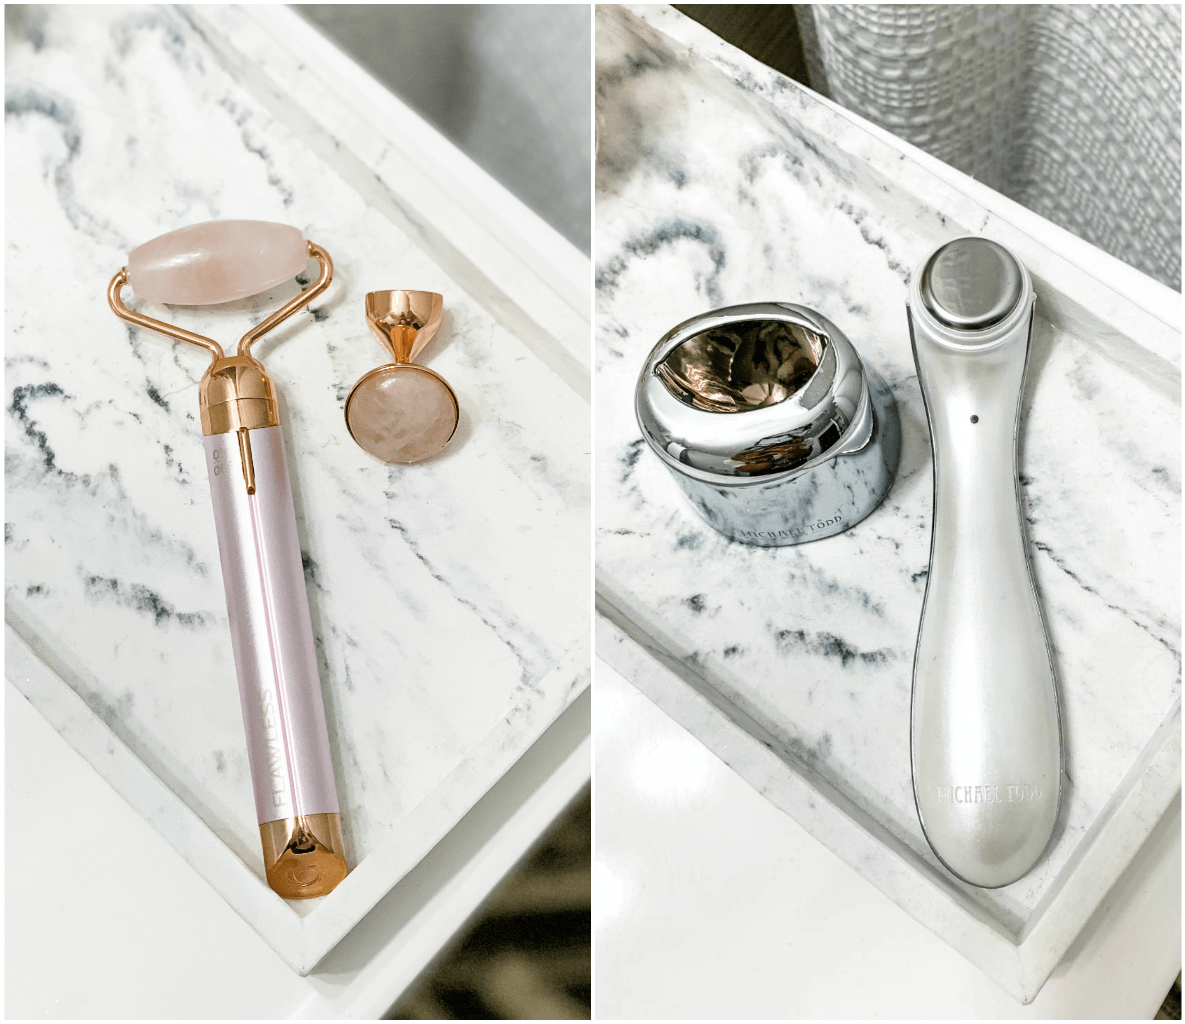 Rose Quartz Contouring Facial Roller, Michael Todd Beauty SonicERASER Pro, Winter Skincare Routine, Dry Sensitive Skincare, Tilden of To Be Bright